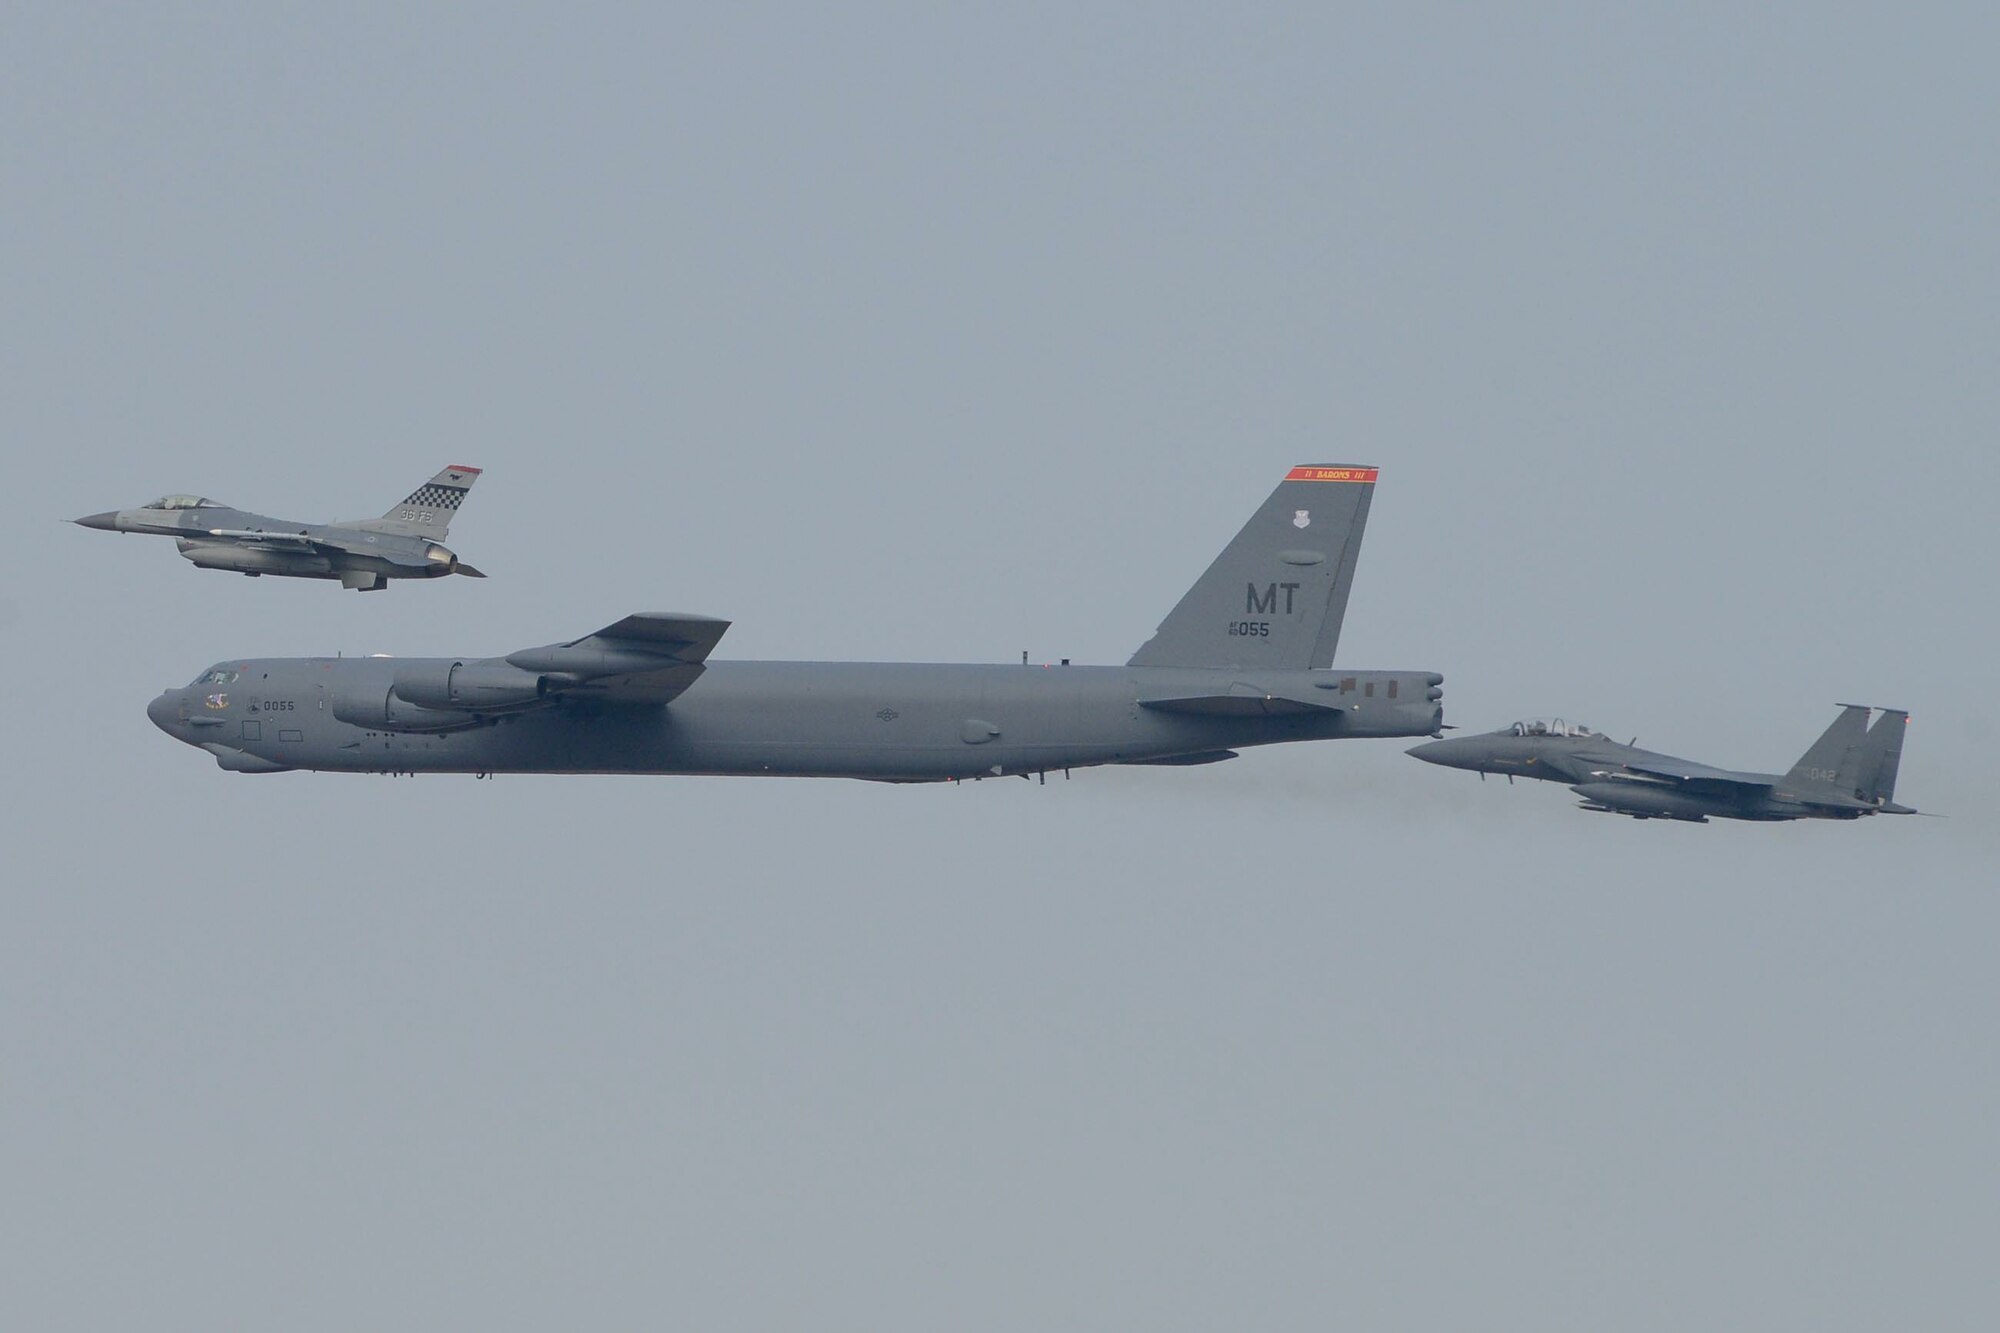 A U.S. Air Force B-52H  Stratofortress from Andersen Air Force Base, Guam, conducted a low-level flight in the vicinity of Osan, South Korea, in response to recent provocative action by North Korea Jan 10, 2016. The B-52 was joined by a ROKAF F-15 Slam Eagle and a U.S. Air Force F-16 Fighting Falcon.  The B-52 is a is a long-range, heavy bomber that can fly up to 50,000 feet and has the capability to carry 70,000 pounds of nuclear or precision guided conventional ordnance with worldwide precision navigation capability. (U.S. Air Force photo/Airman 1st Class Dillian Bamman)